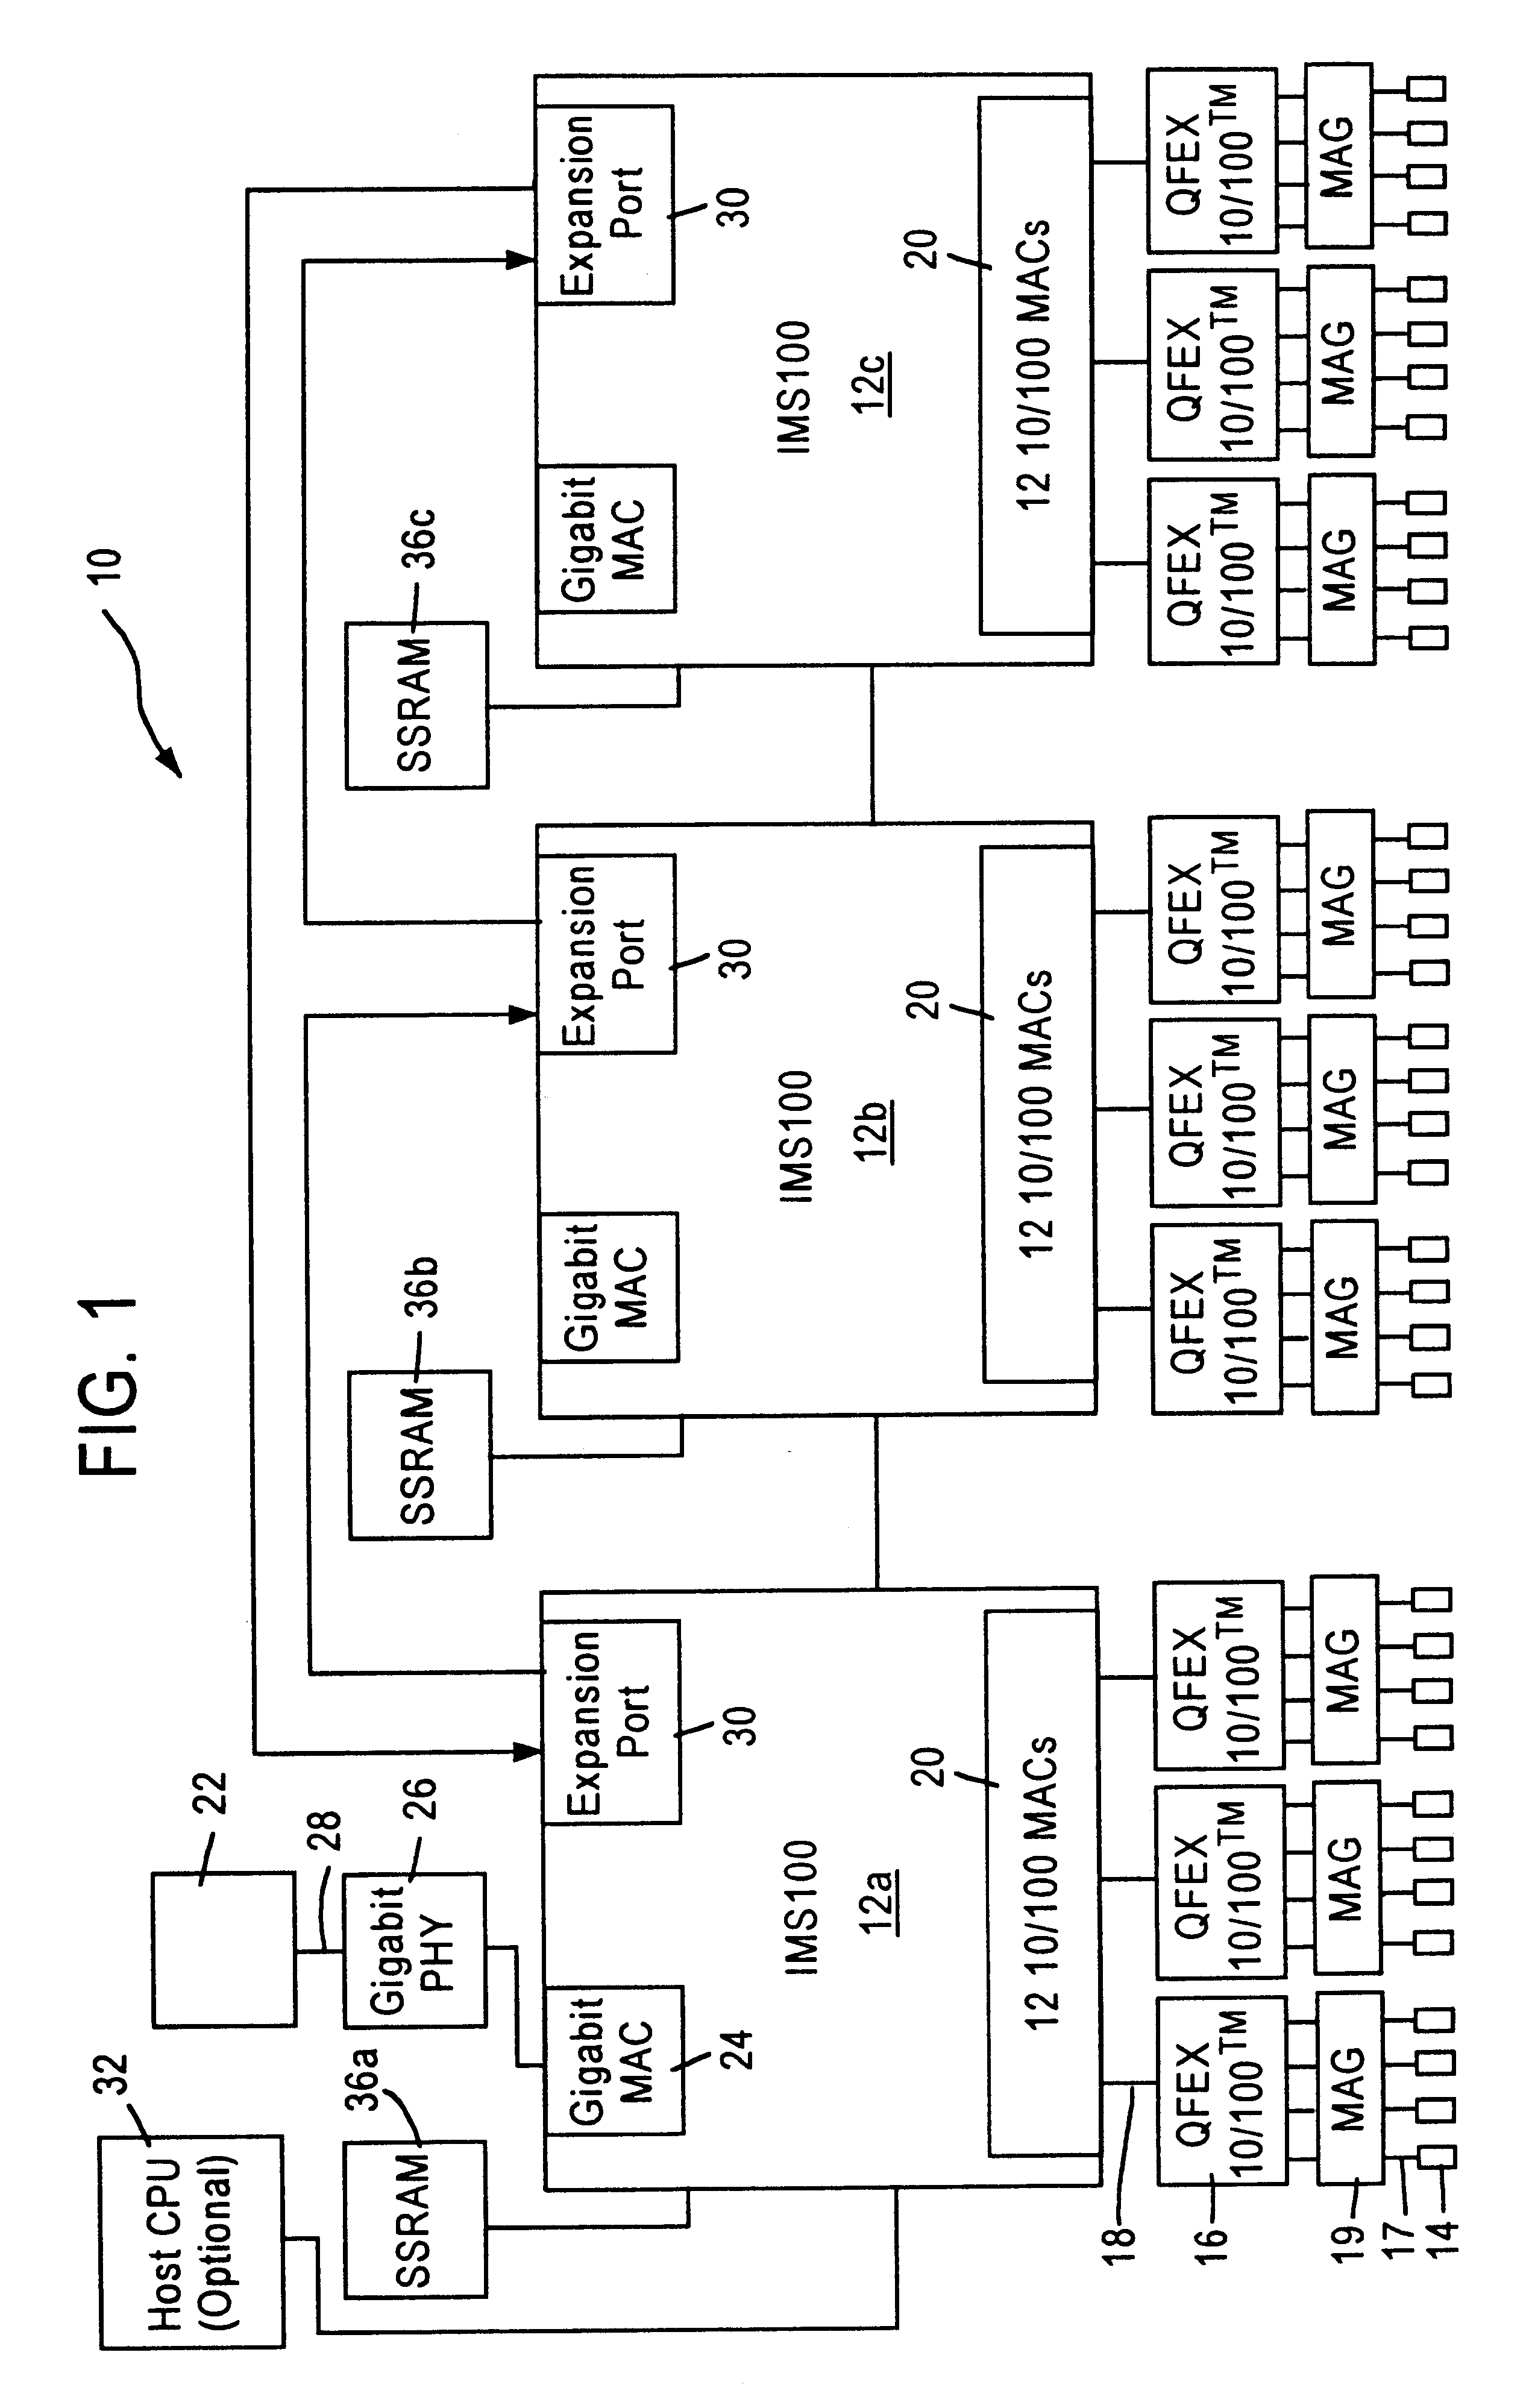 Method and apparatus for manipulating VLAN tags